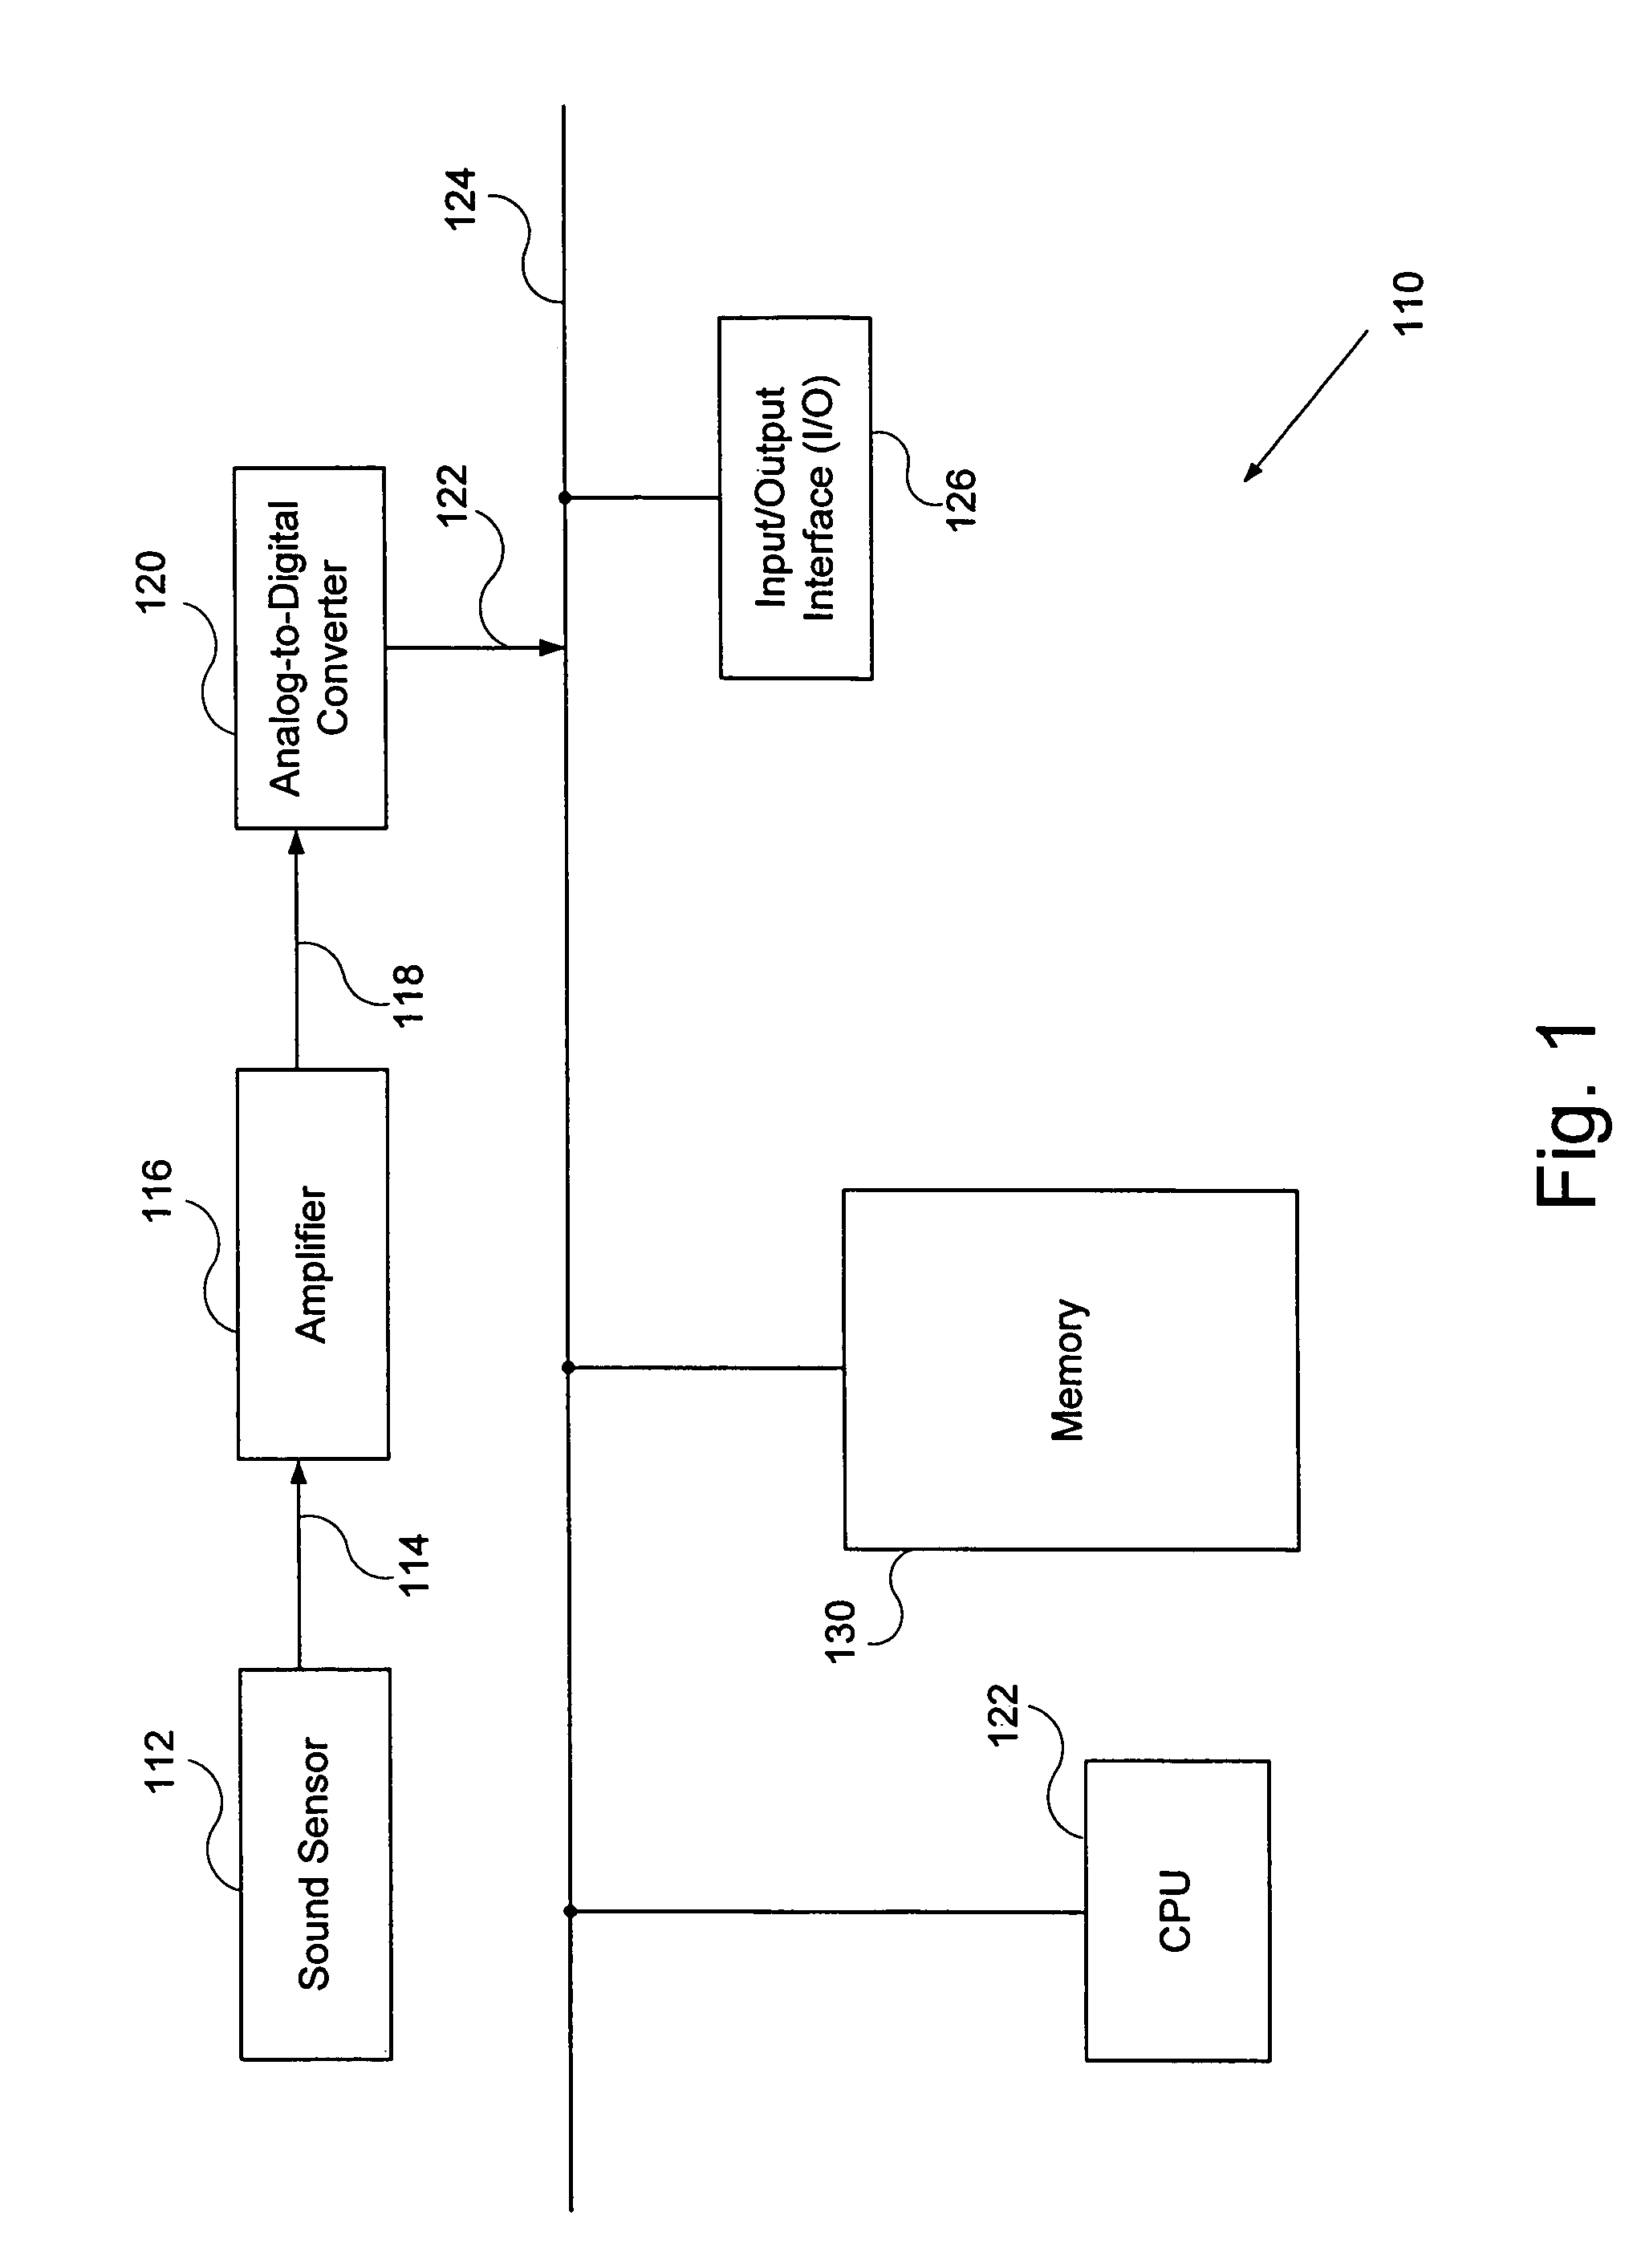 System and method for effectively implementing an optimized language model for speech recognition